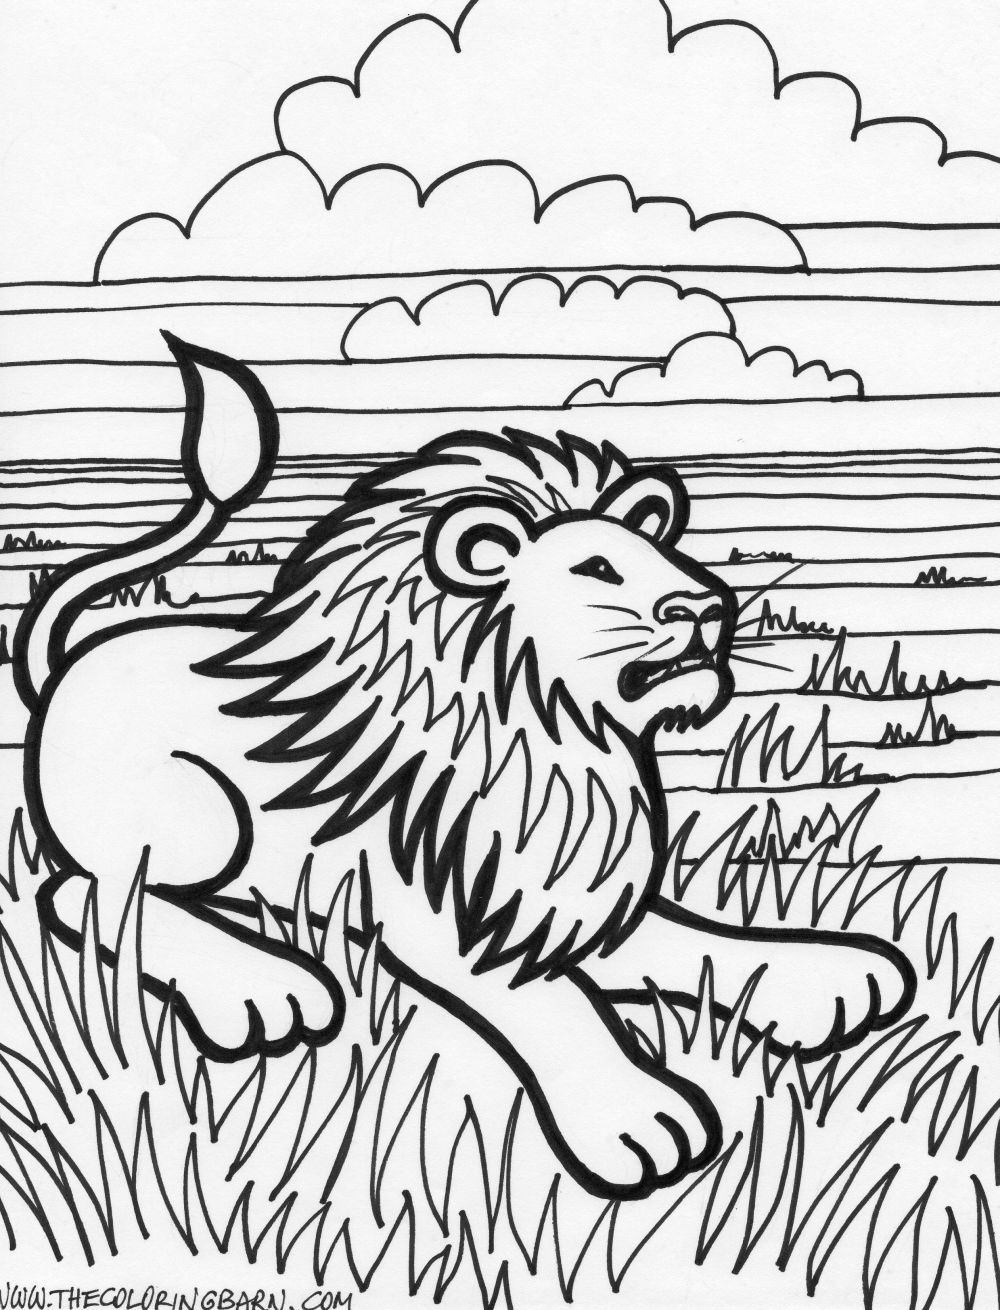  Tiger coloring pages | Animal coloring pages | #10